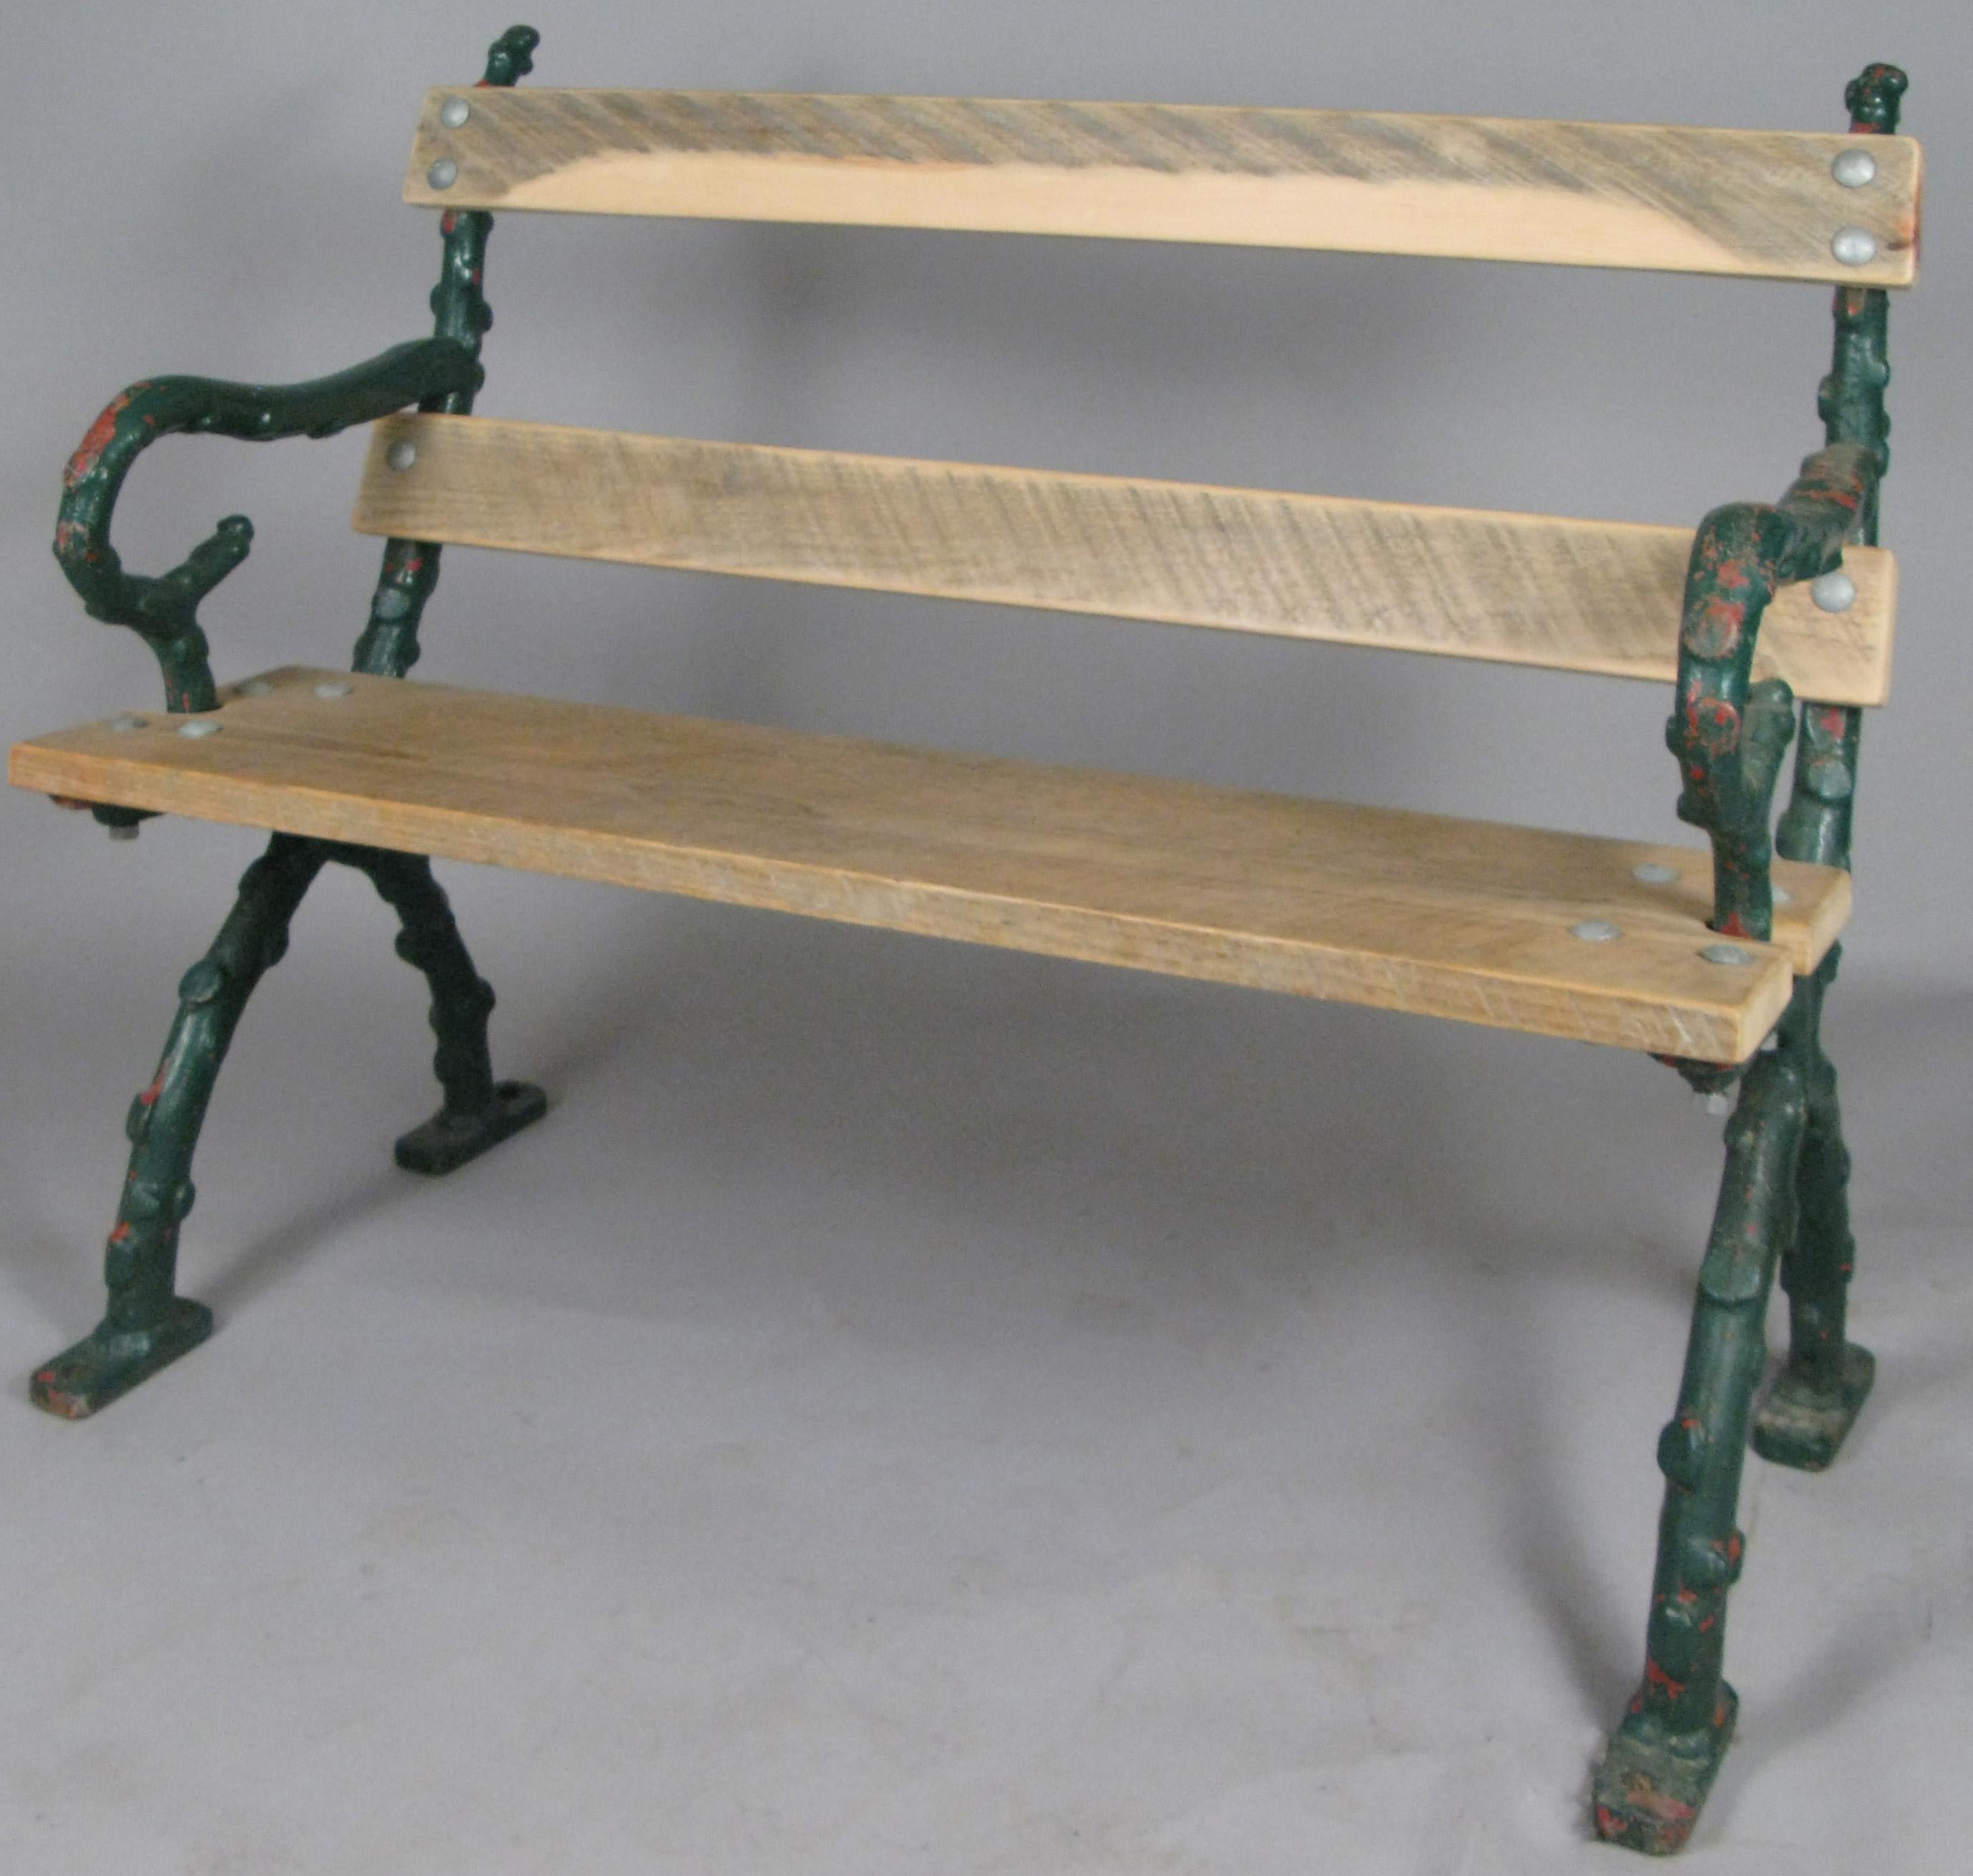 A very well made and handsome antique early 20th century garden bench from Bath, England. The cast iron frame is made in a branch design, and the wooden seat and back have been recently replaced.